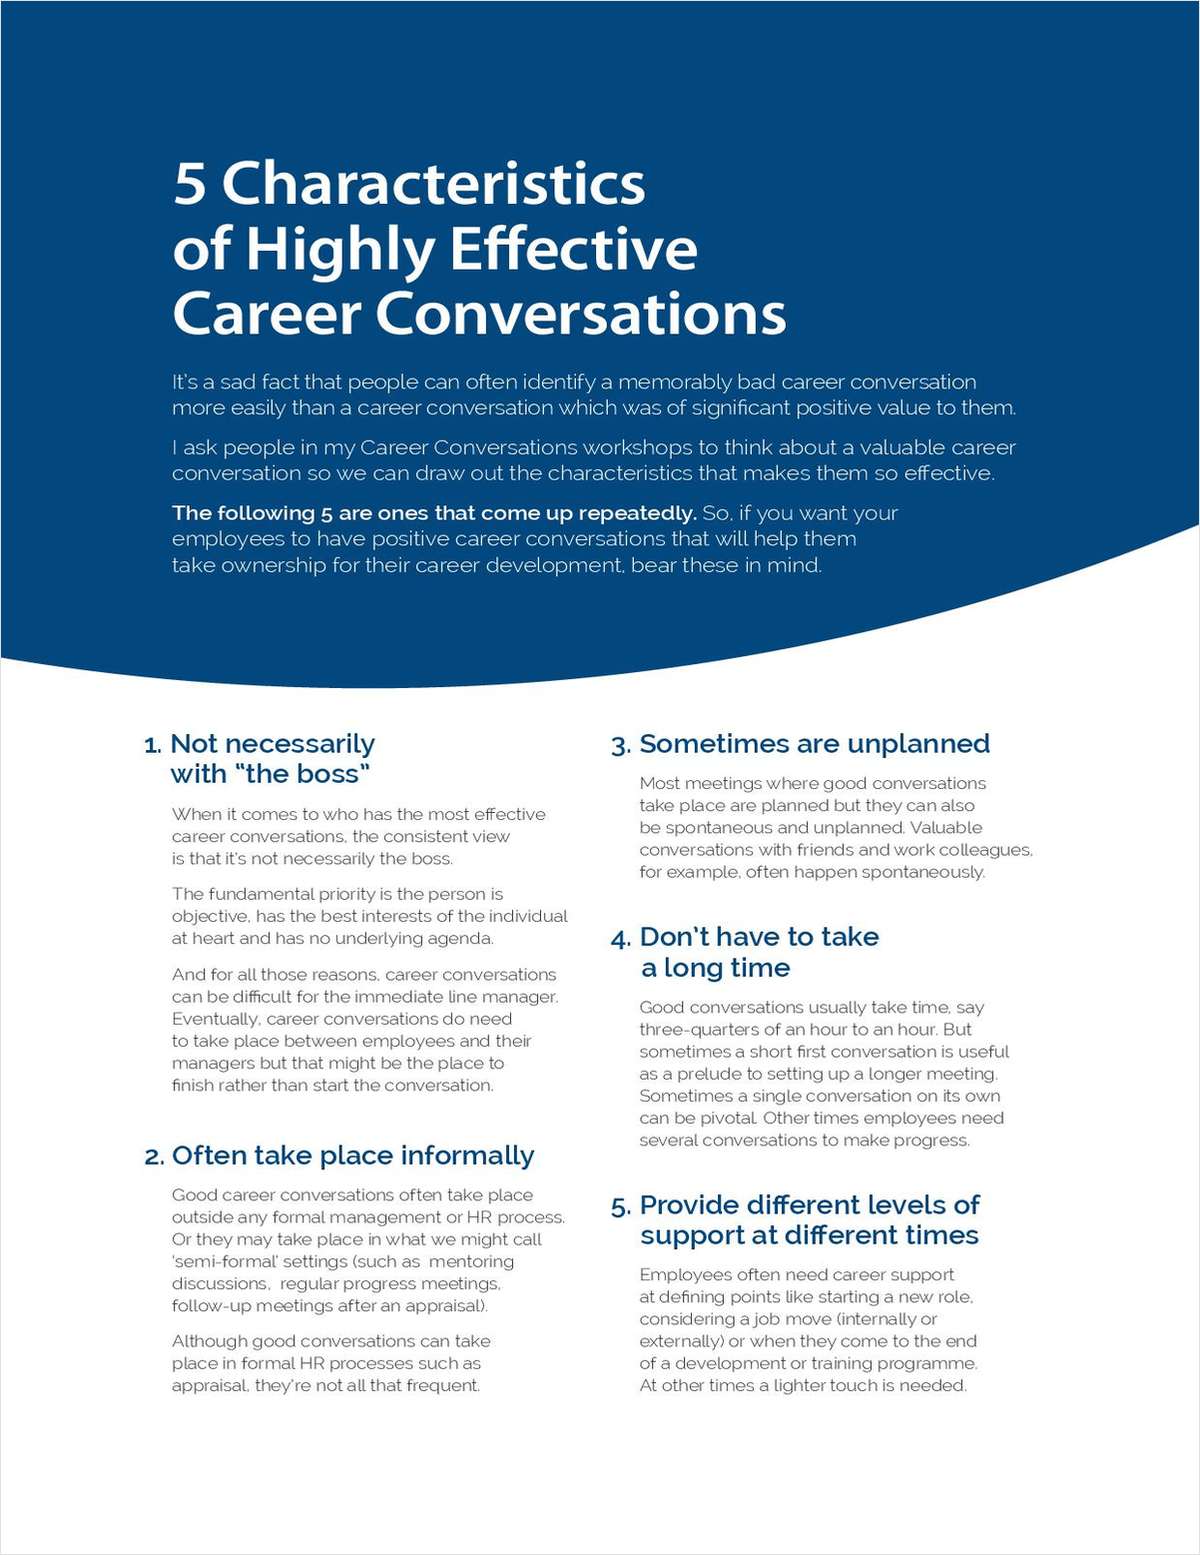 5 Characteristics of Highly Effective Career Conversations